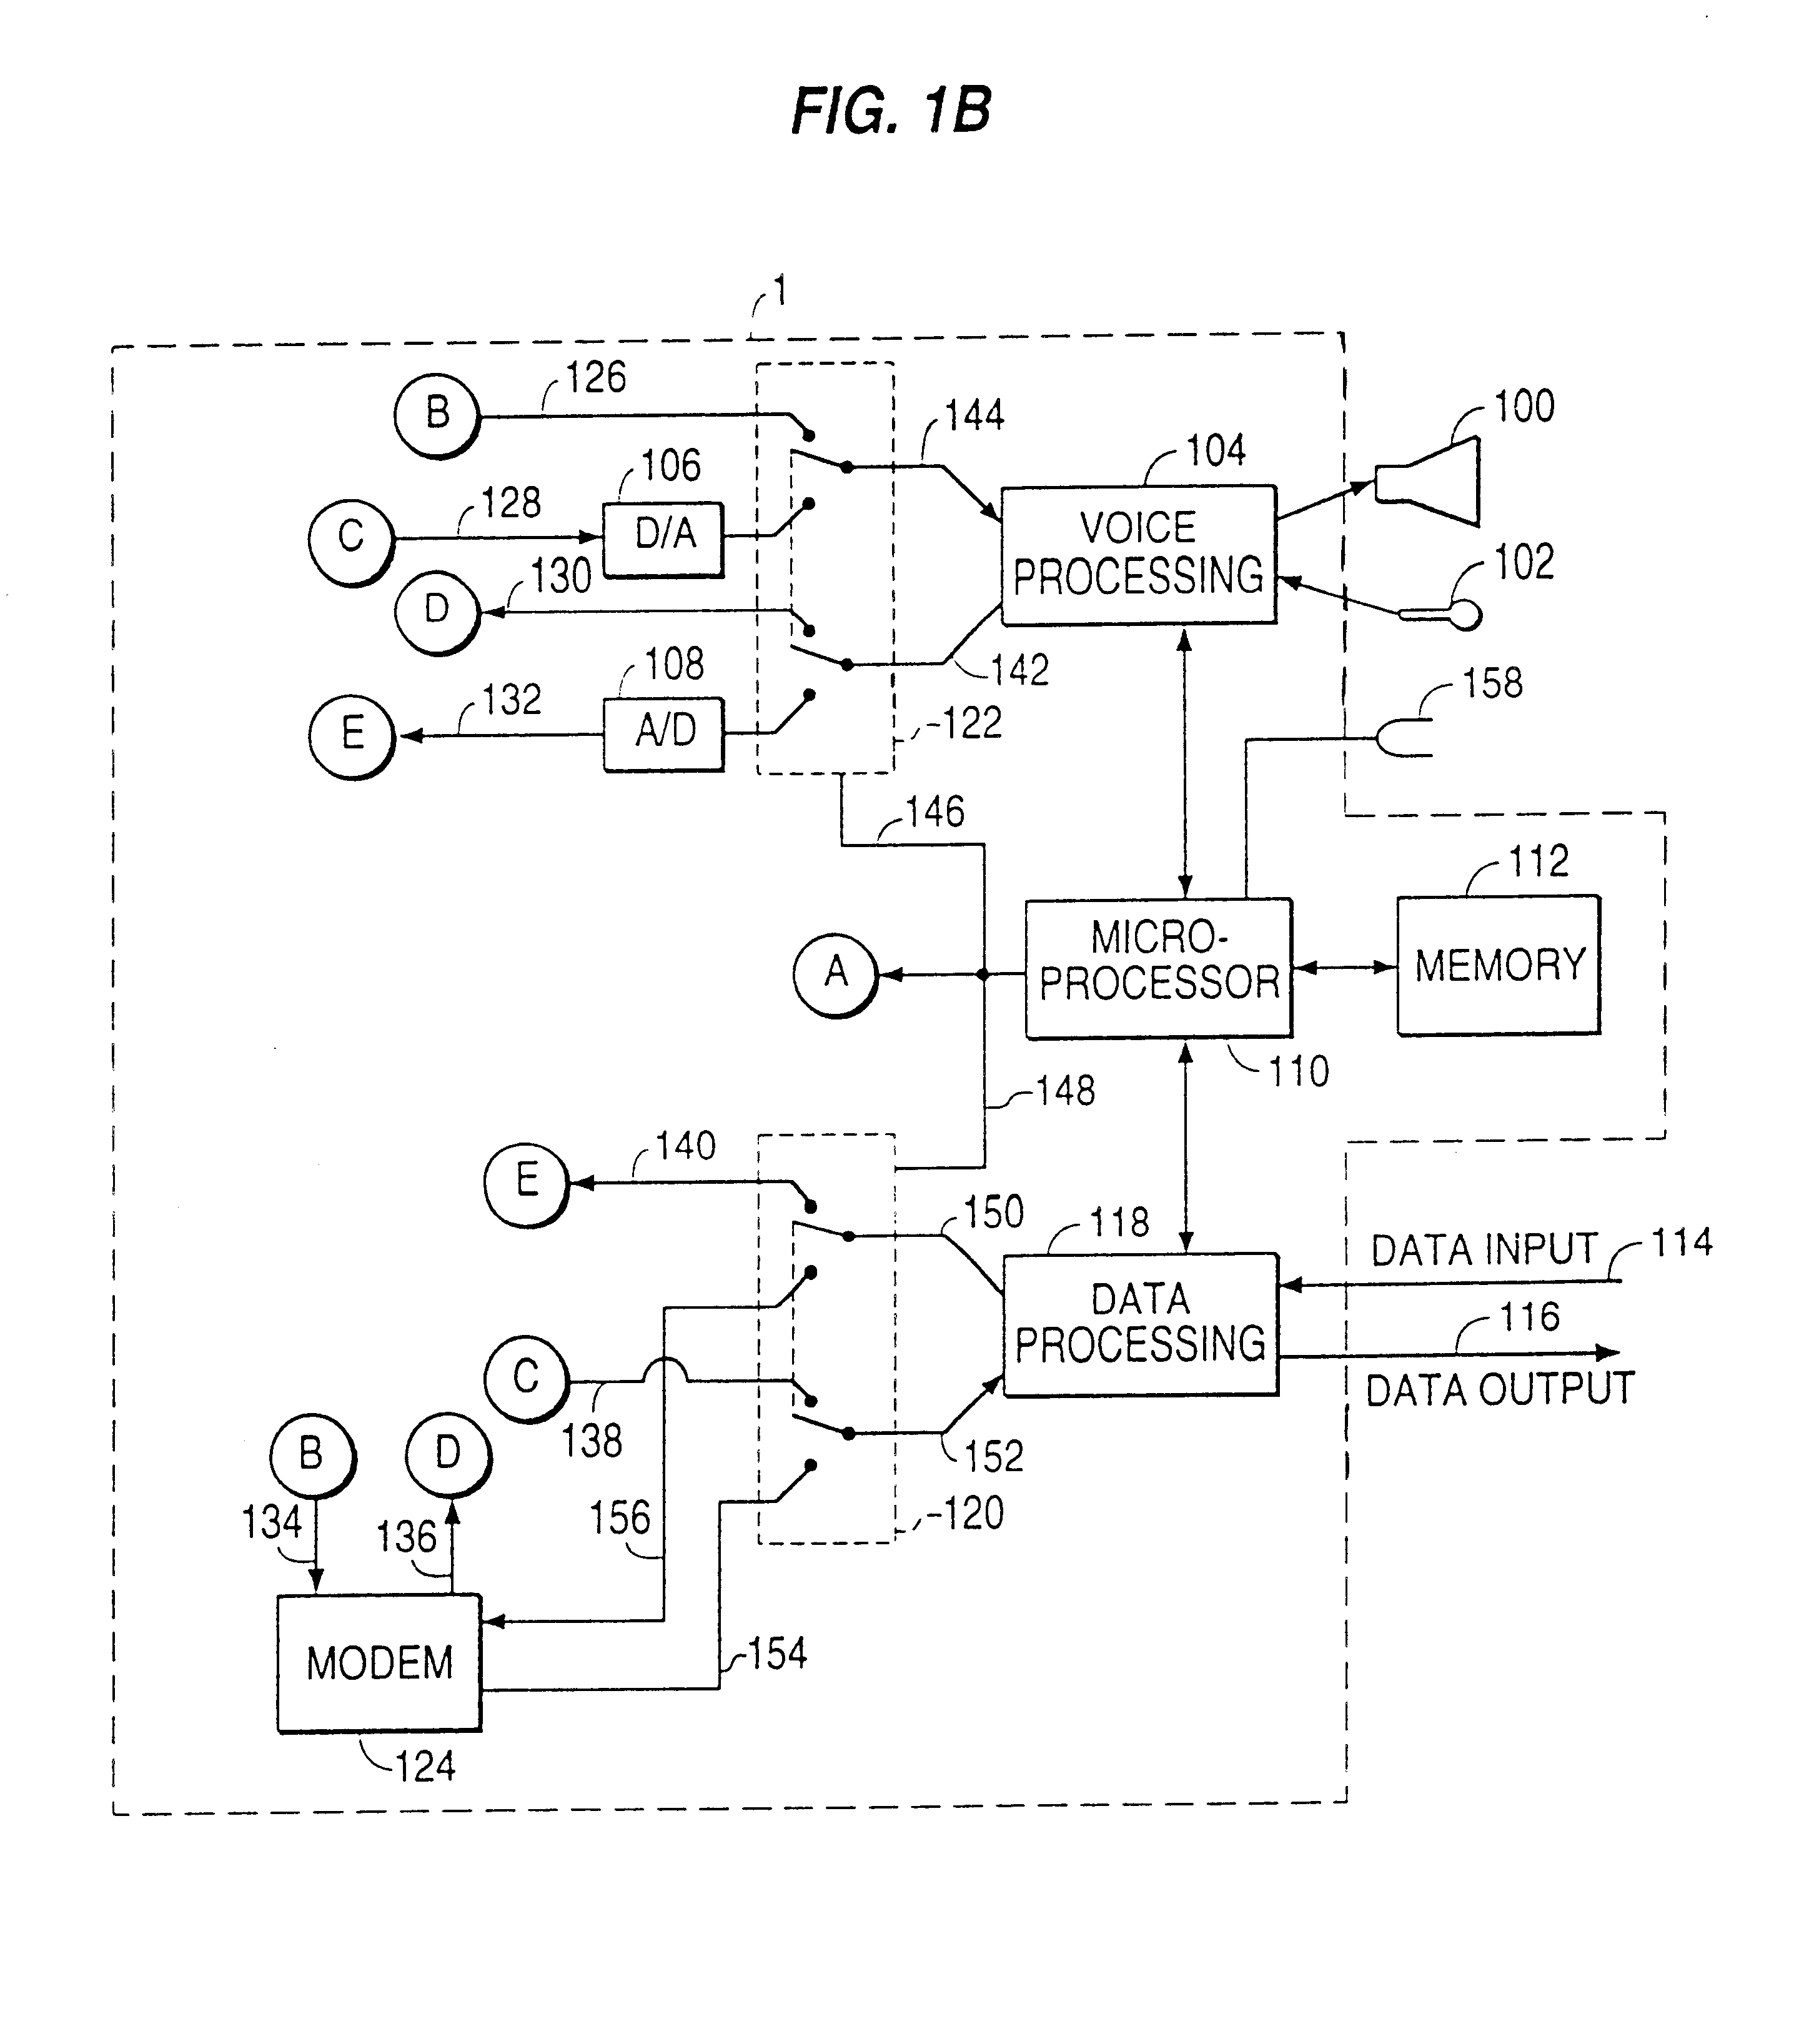 Apparatus and methods for networking omni-modal radio devices